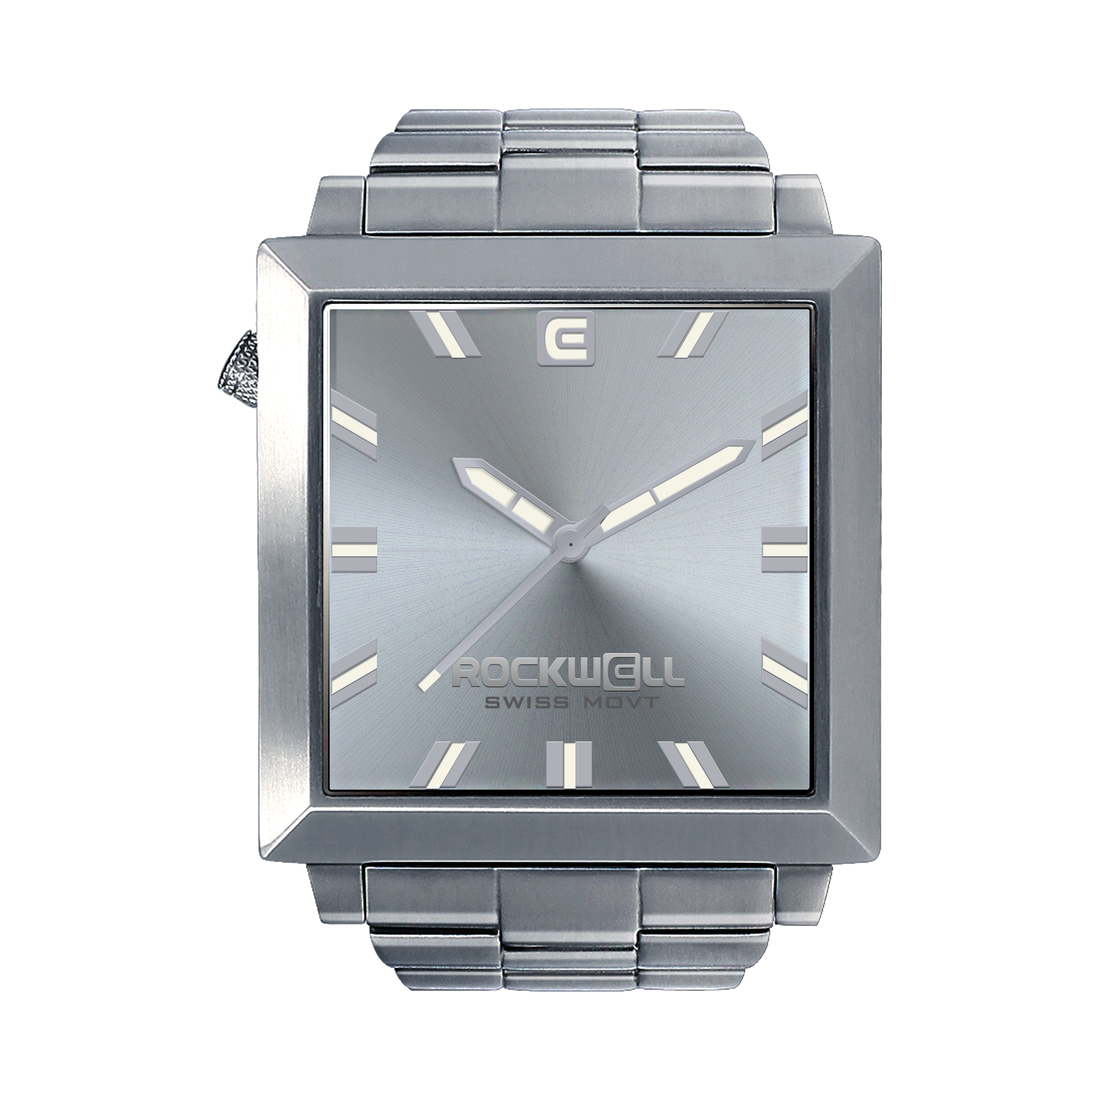 40mm squared silver case and dial